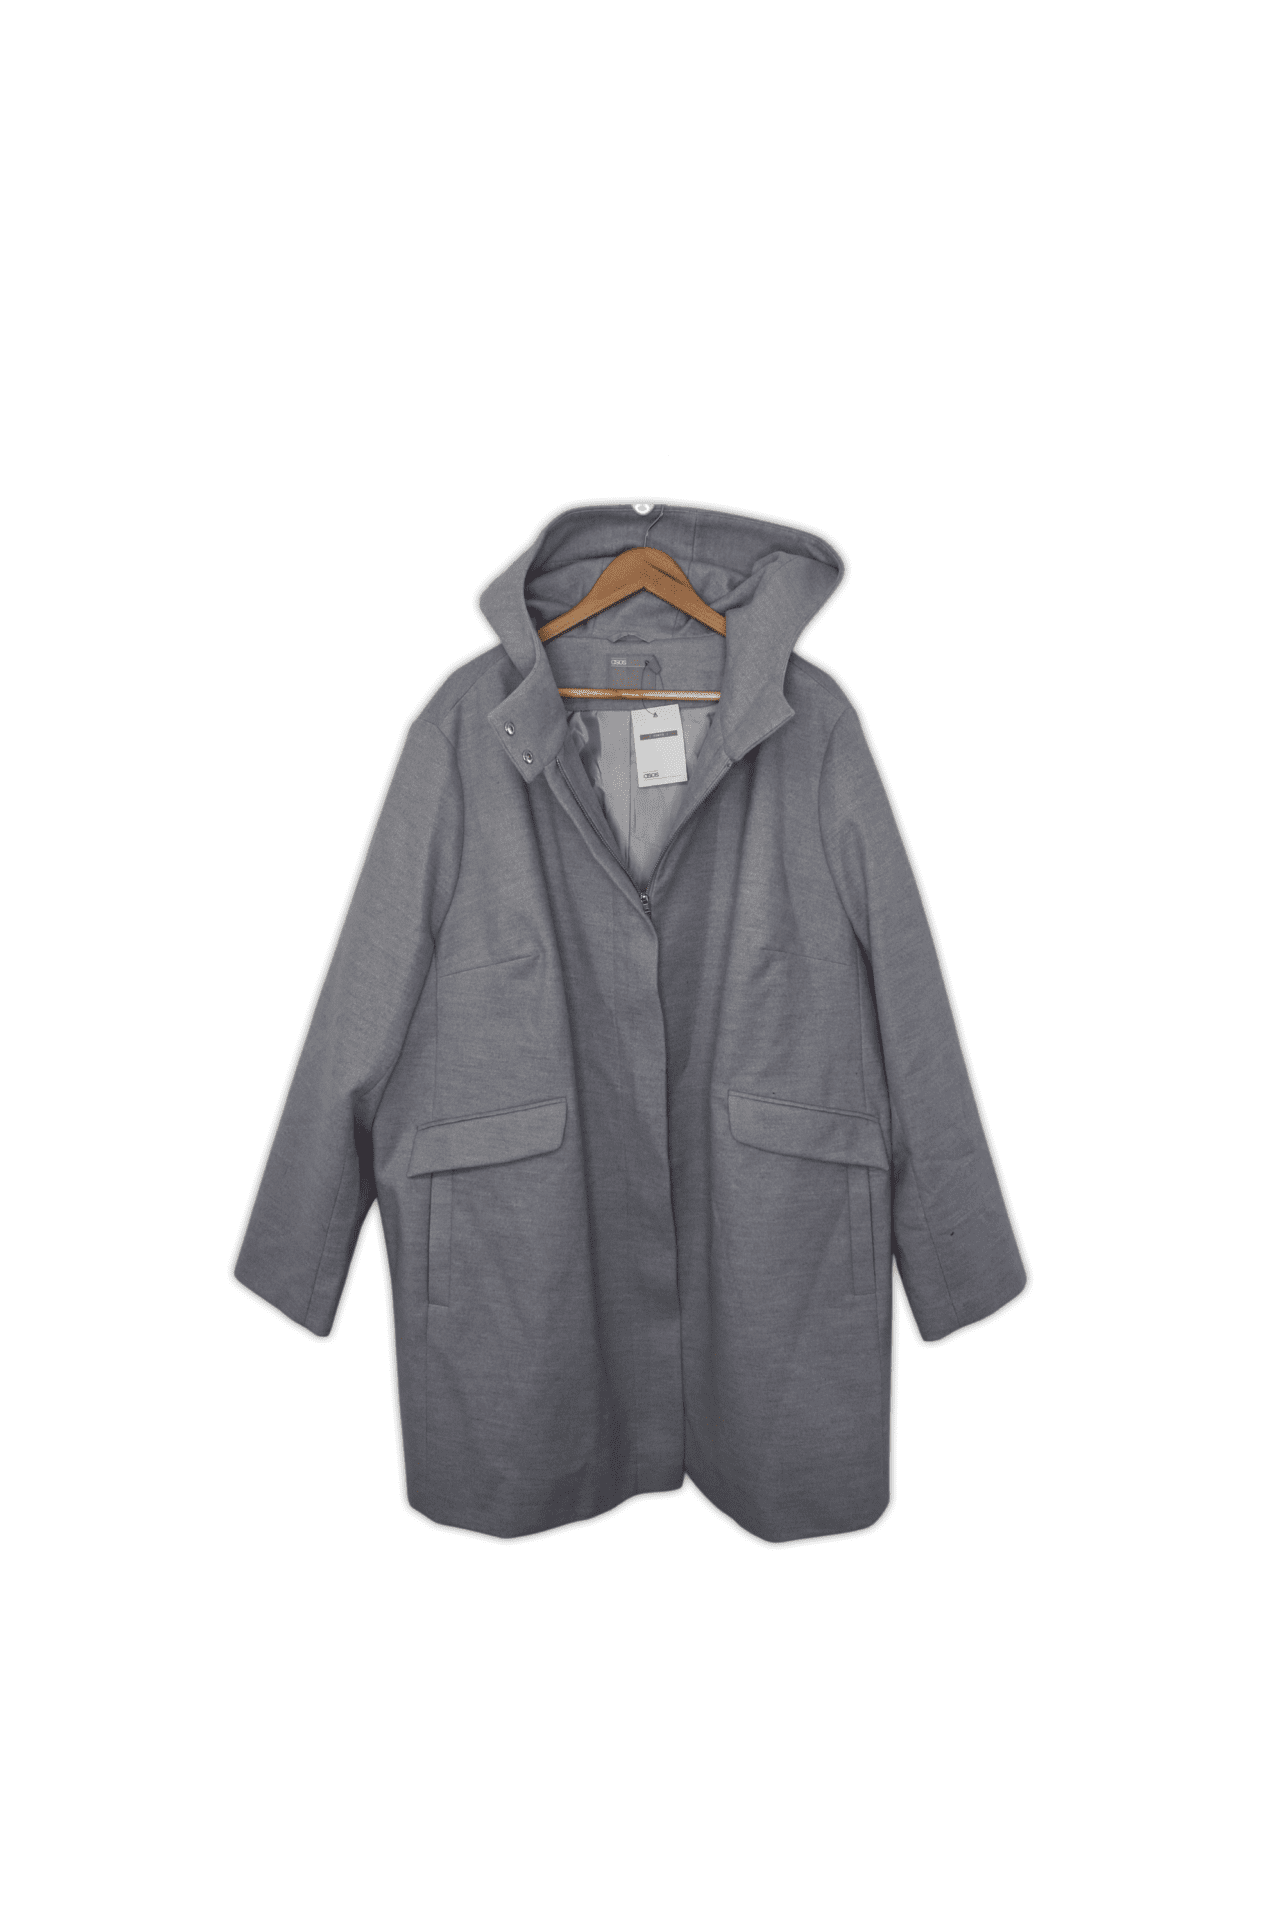 A modern style hooded coat featuring a center front zip close, front patch pockets and inseam pockets. 3XL